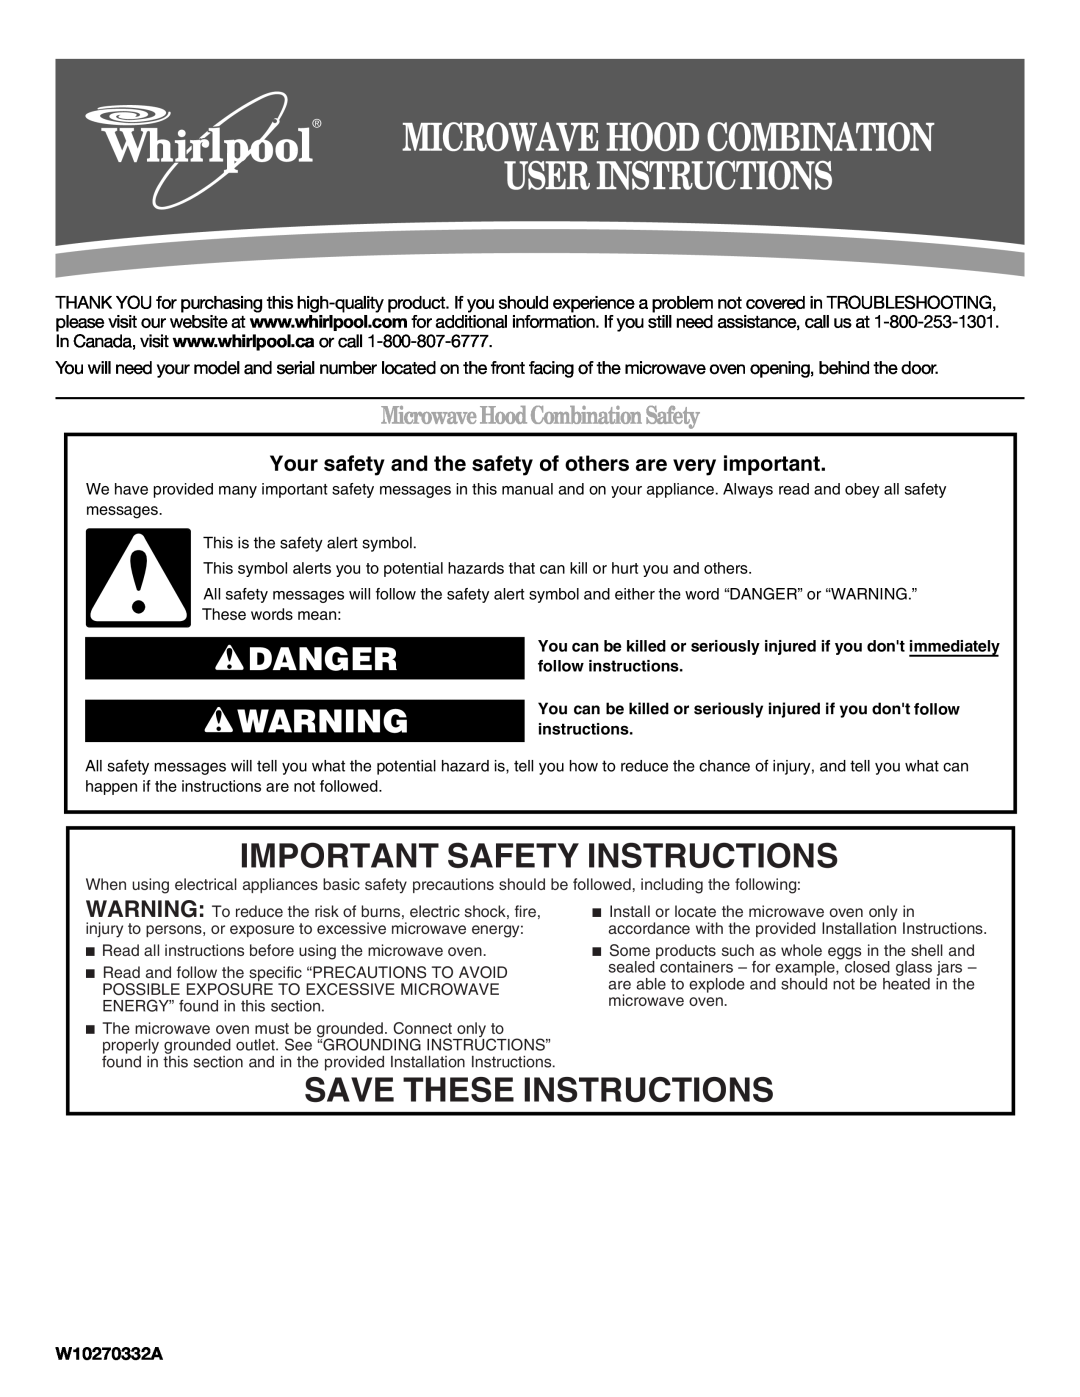 Whirlpool W10270332A important safety instructions Microwave Hood Combination User Instructions, Save These Instructions 